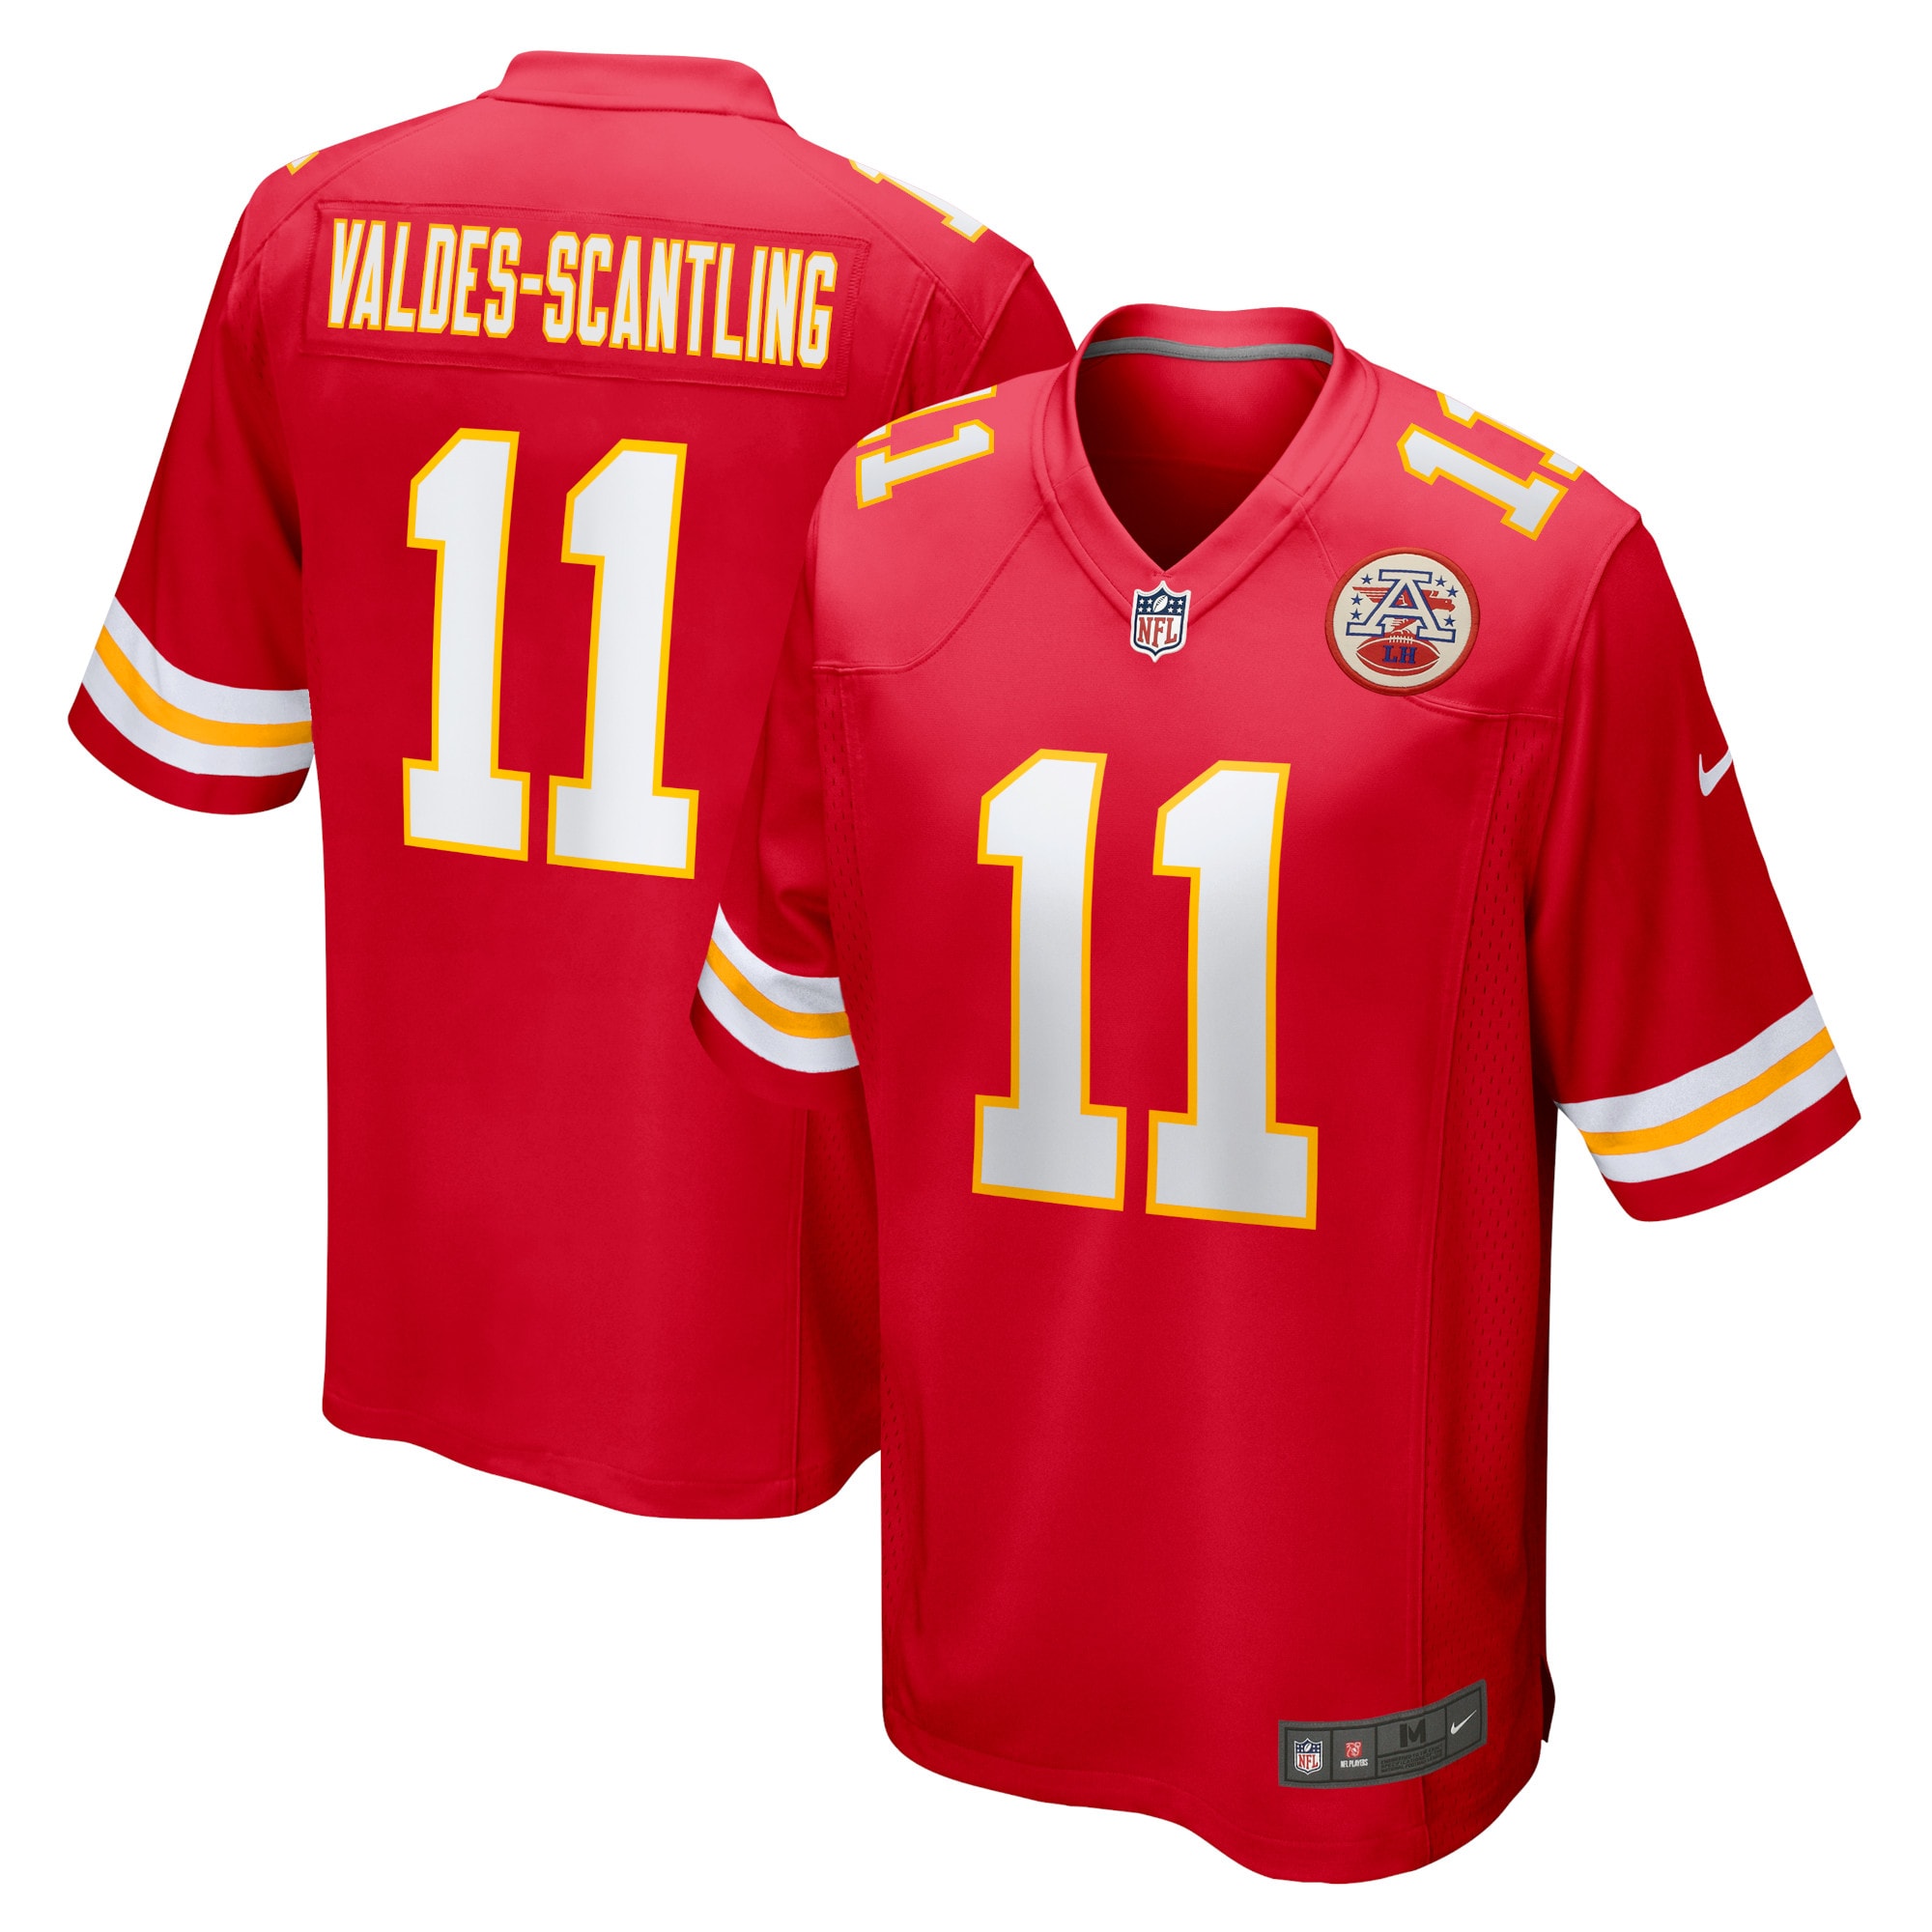 Men's Kansas City Chiefs Jerseys Red Marquez Valdes-Scantling Game Style